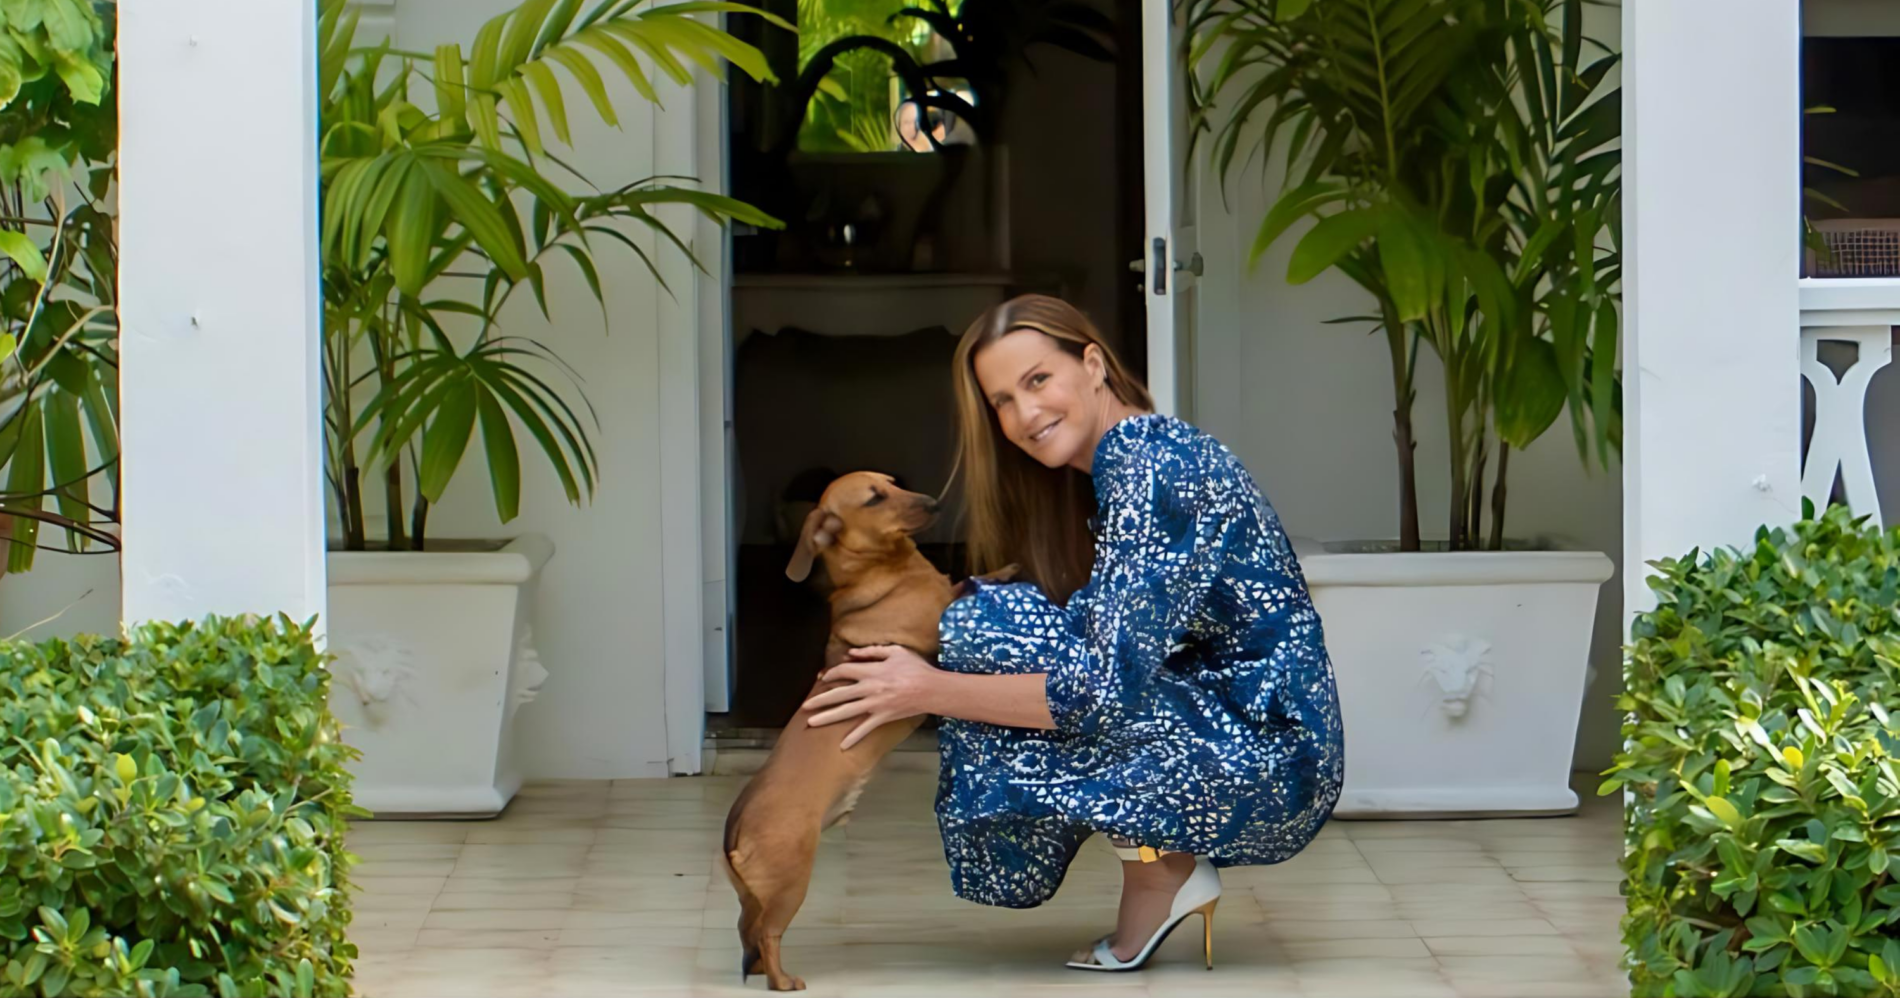 India Hicks in a blue patterned dress crouches down to lovingly embrace her brown dachshund in front of a white house entrance flanked by lush green plants.